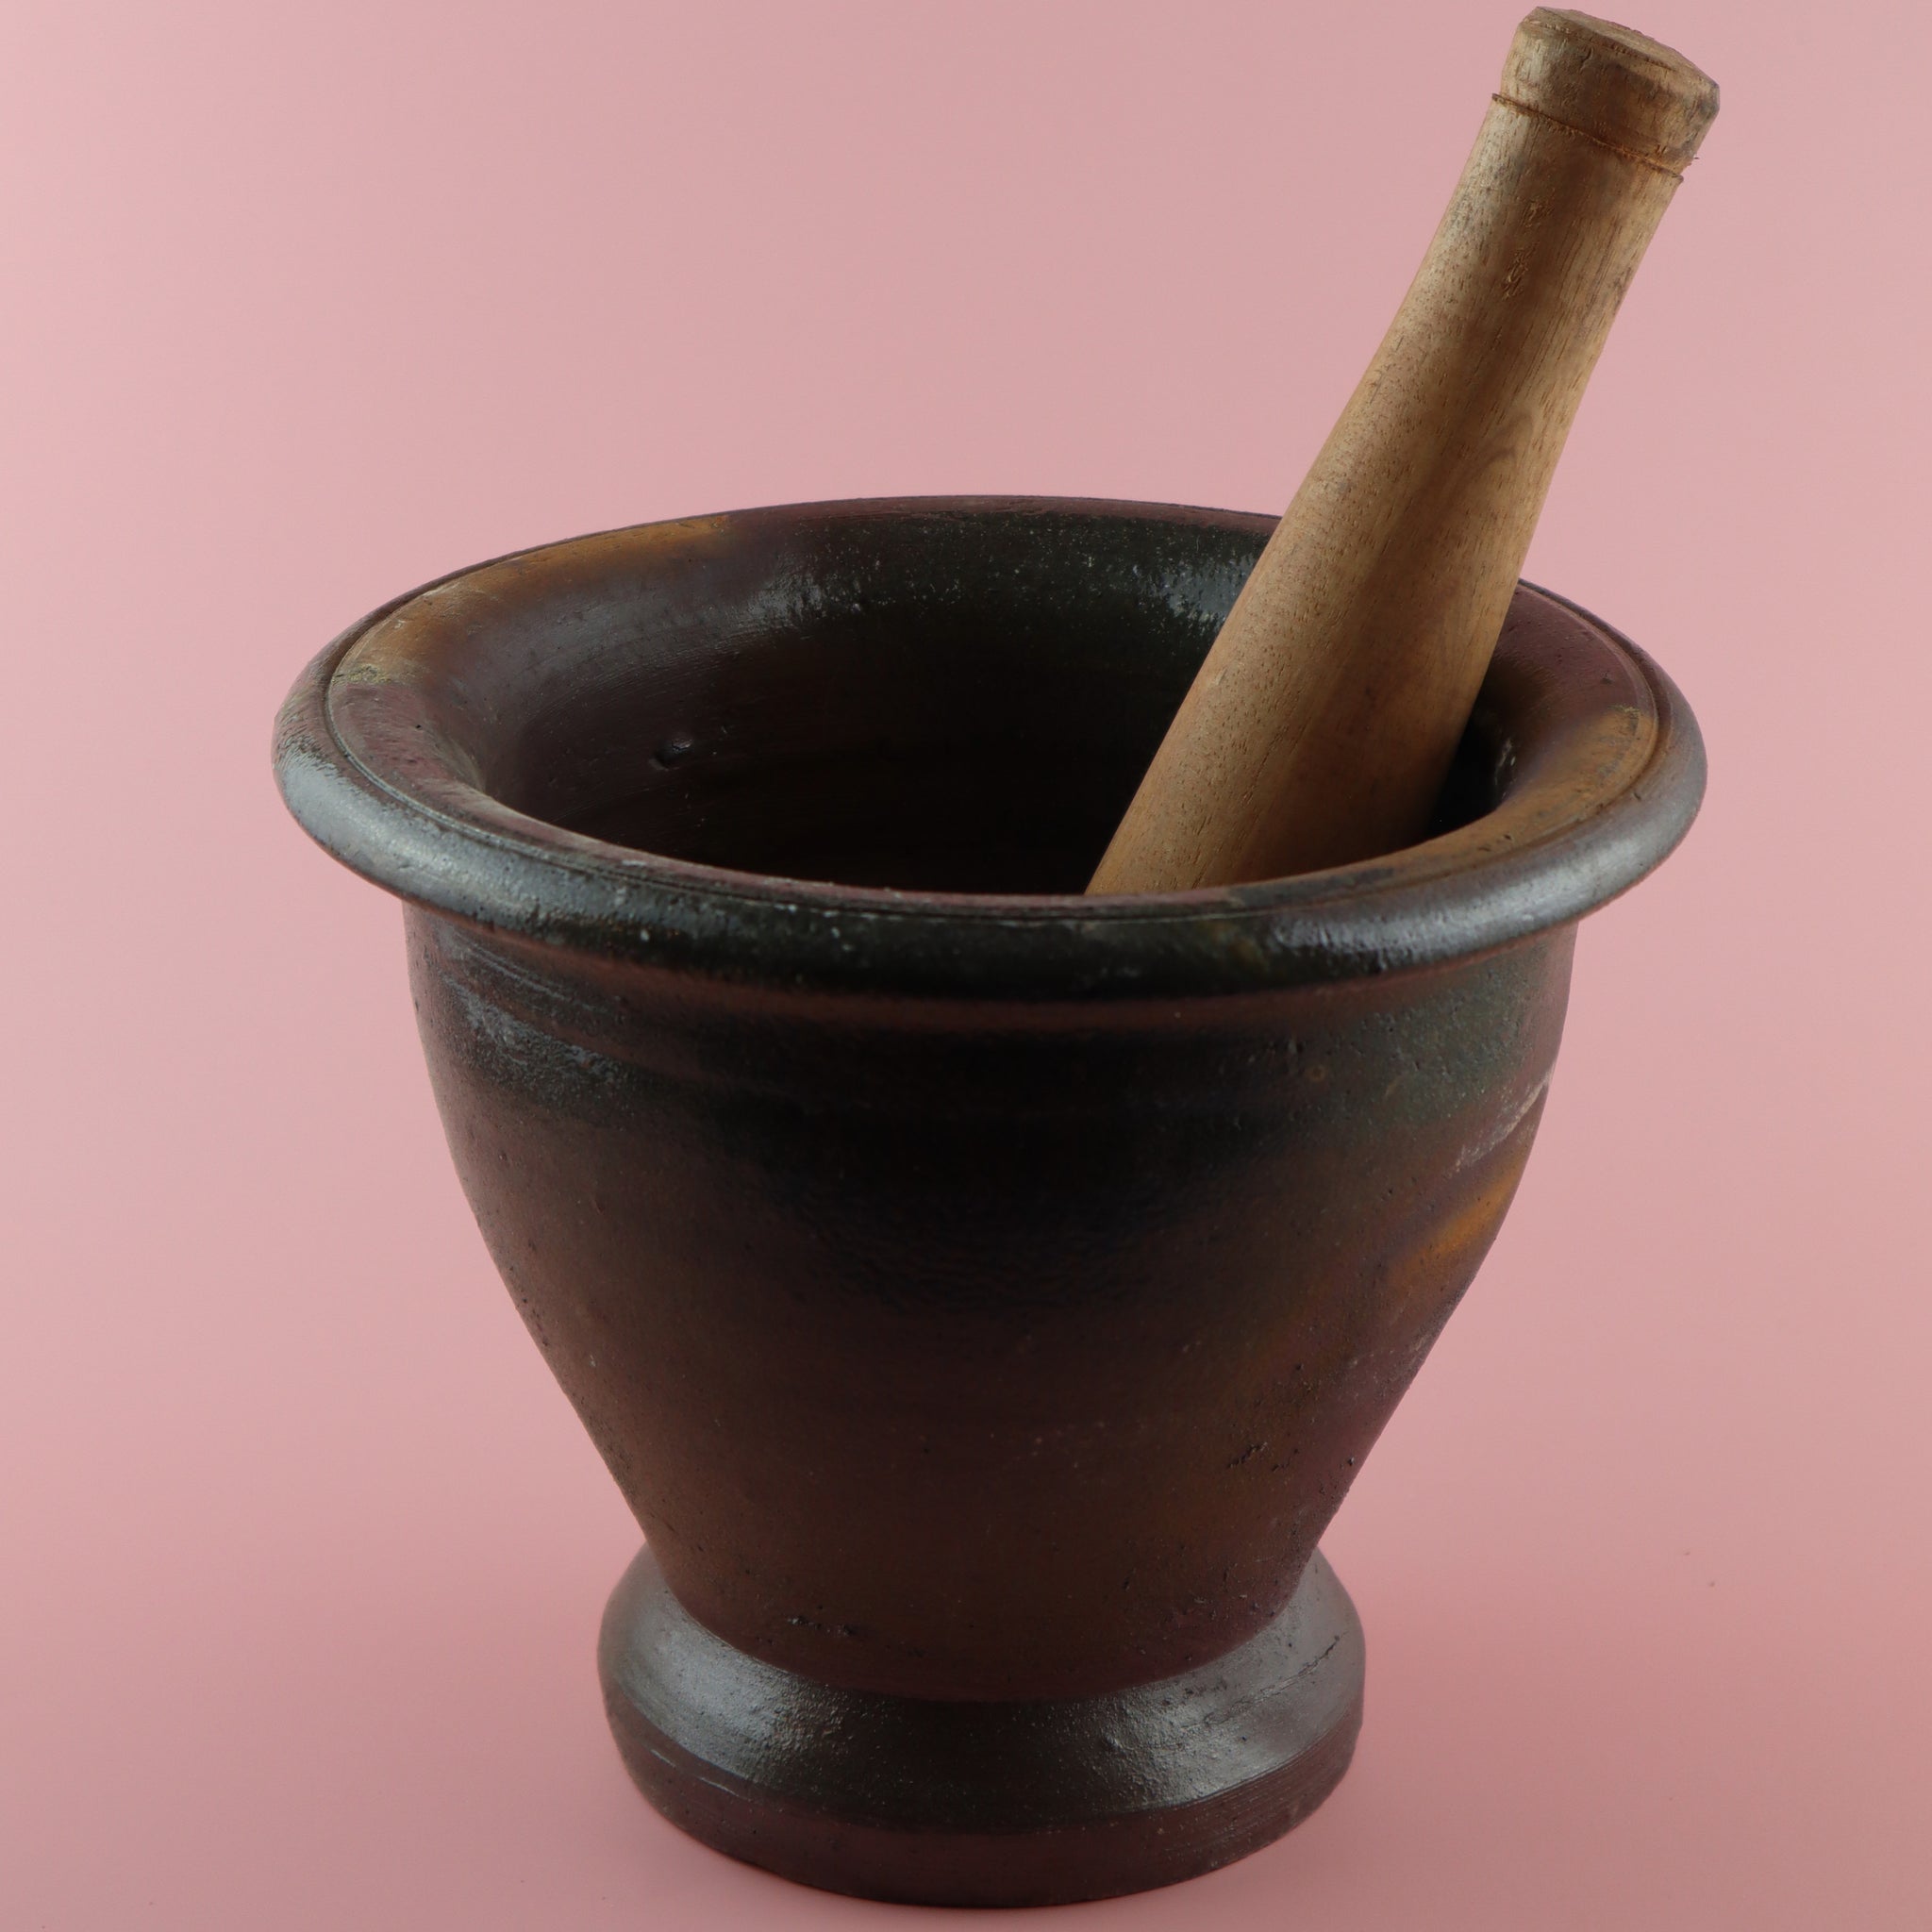 How to Season a Brand New Mortar and Pestle